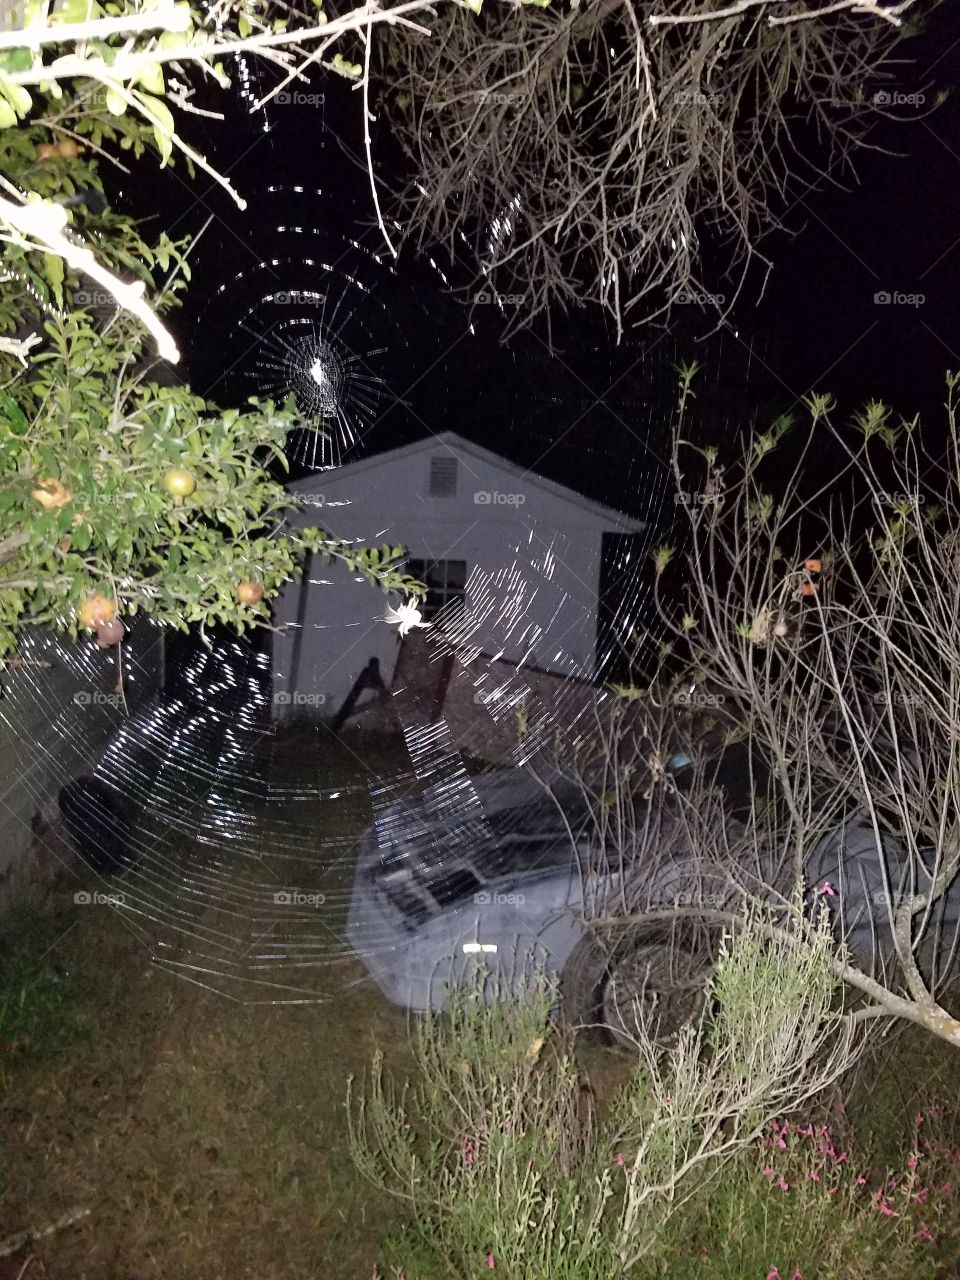 Texas sized spider making a Texas sized web in Texas. The kicker of this picture... I almost walked face first into this giant web that is about 3 ft by 3ft big. Grateful for my flashlight & that I wasn't looking down as I navigated the darkness.